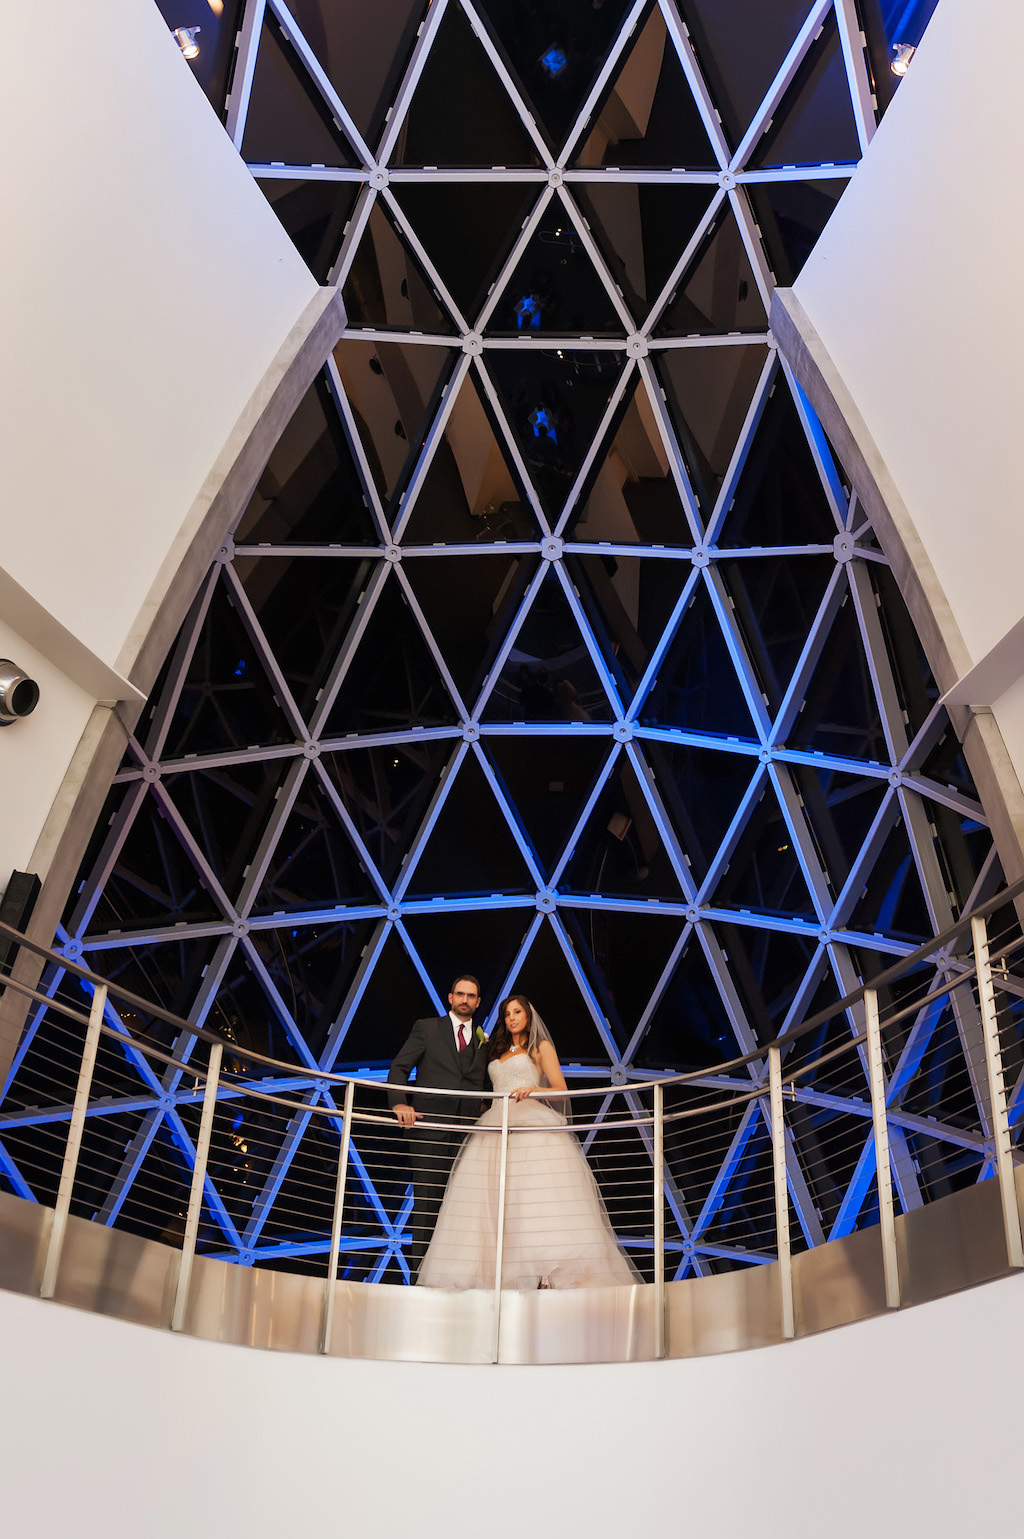 Bride and Groom Overlooking Balcony at Salvador Dali Museum with Triangular Window Backdrop and Blue Uplighting